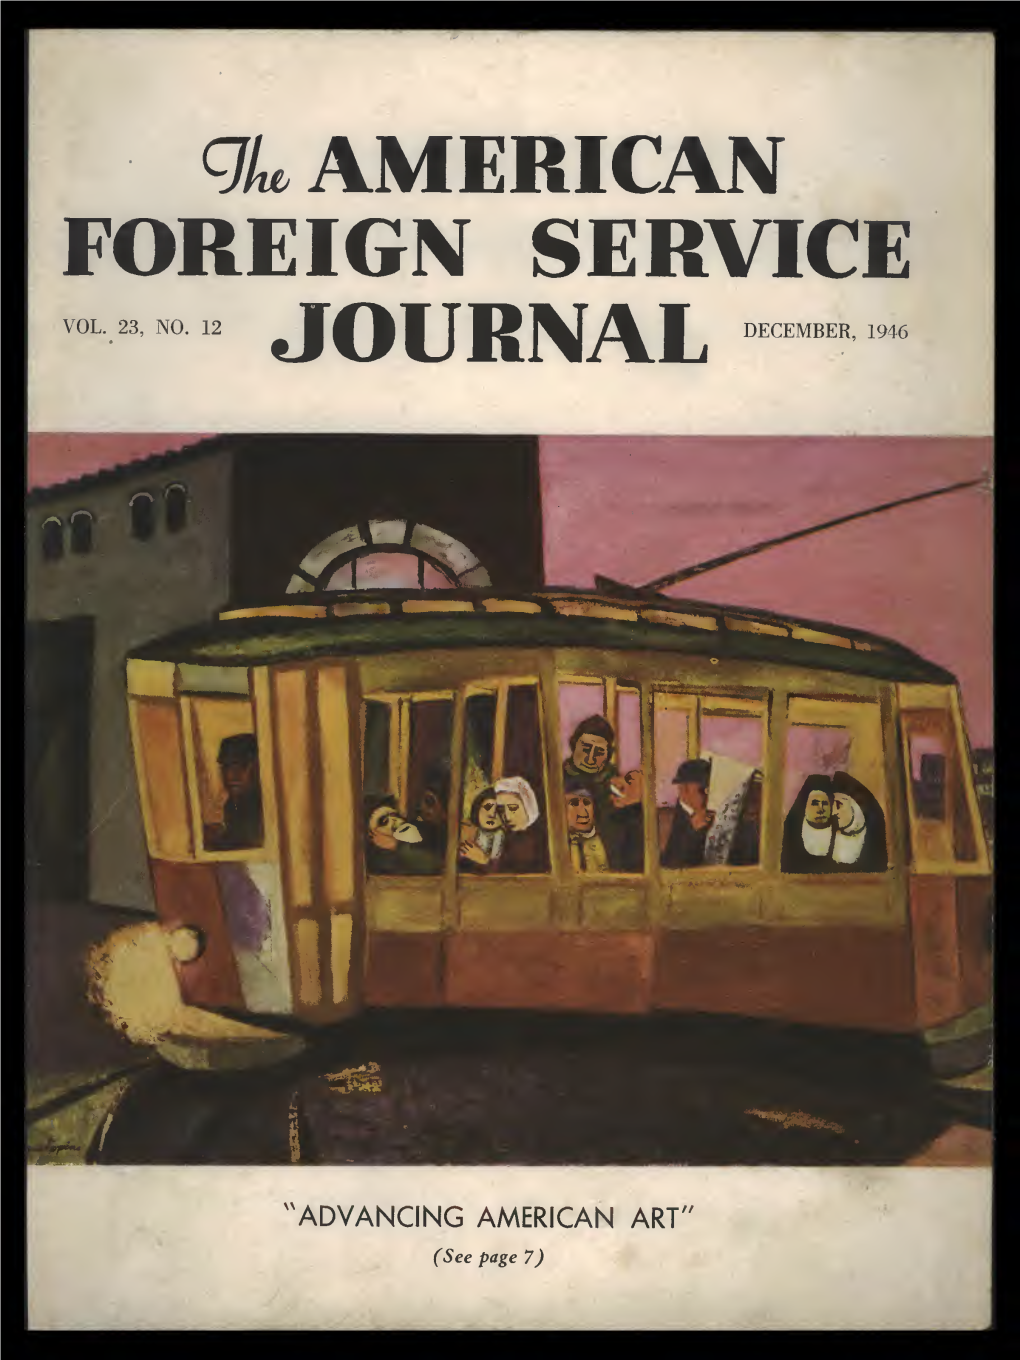 The Foreign Service Journal, December 1946